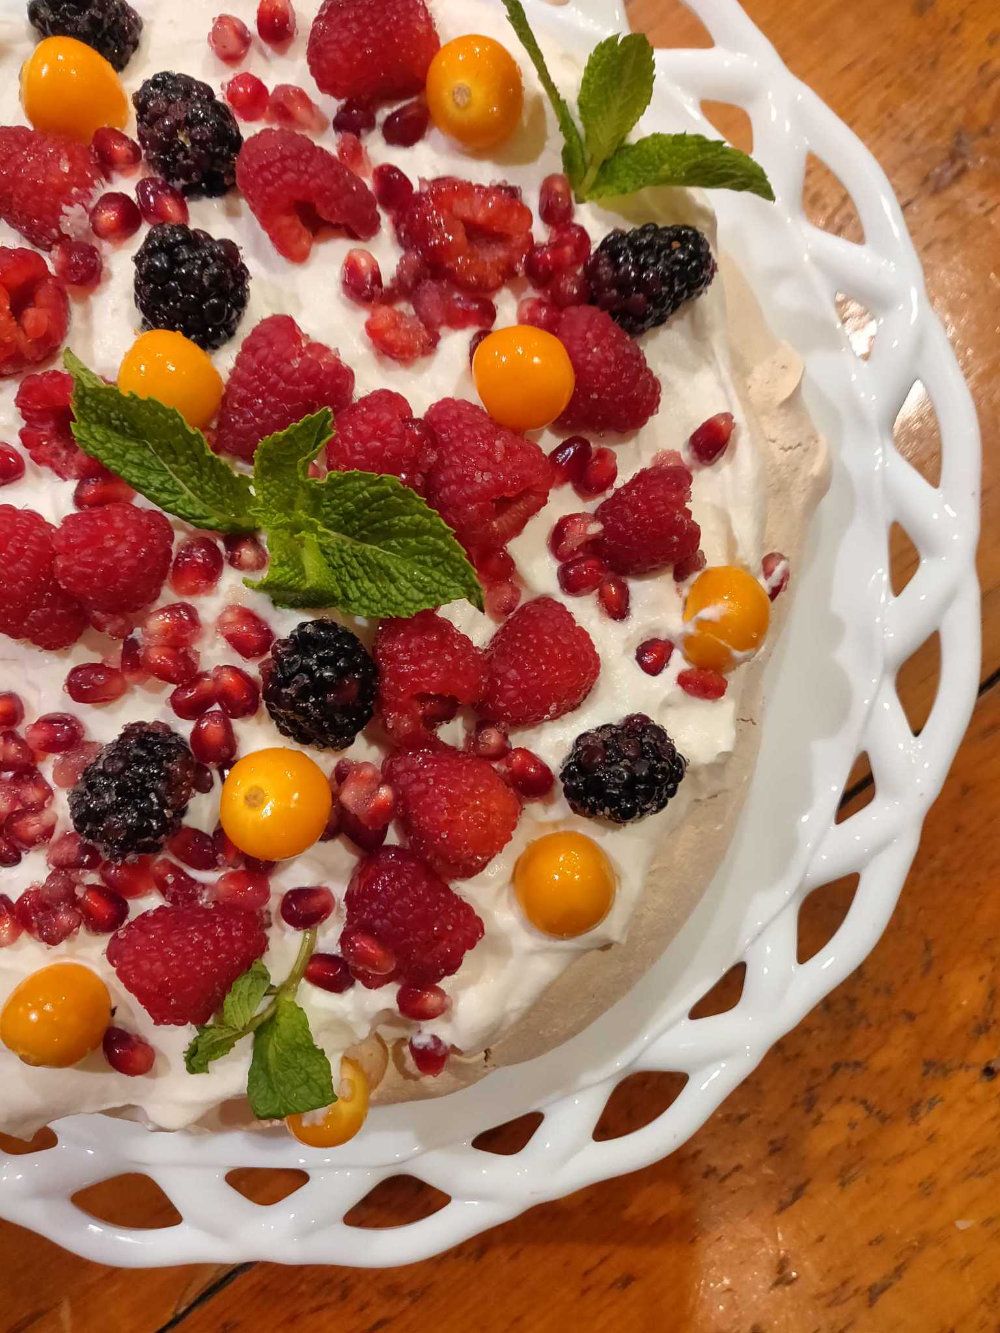 Pavlova topped with raspberries, blackberries, golden berries, and pomegranate served on a white dish.